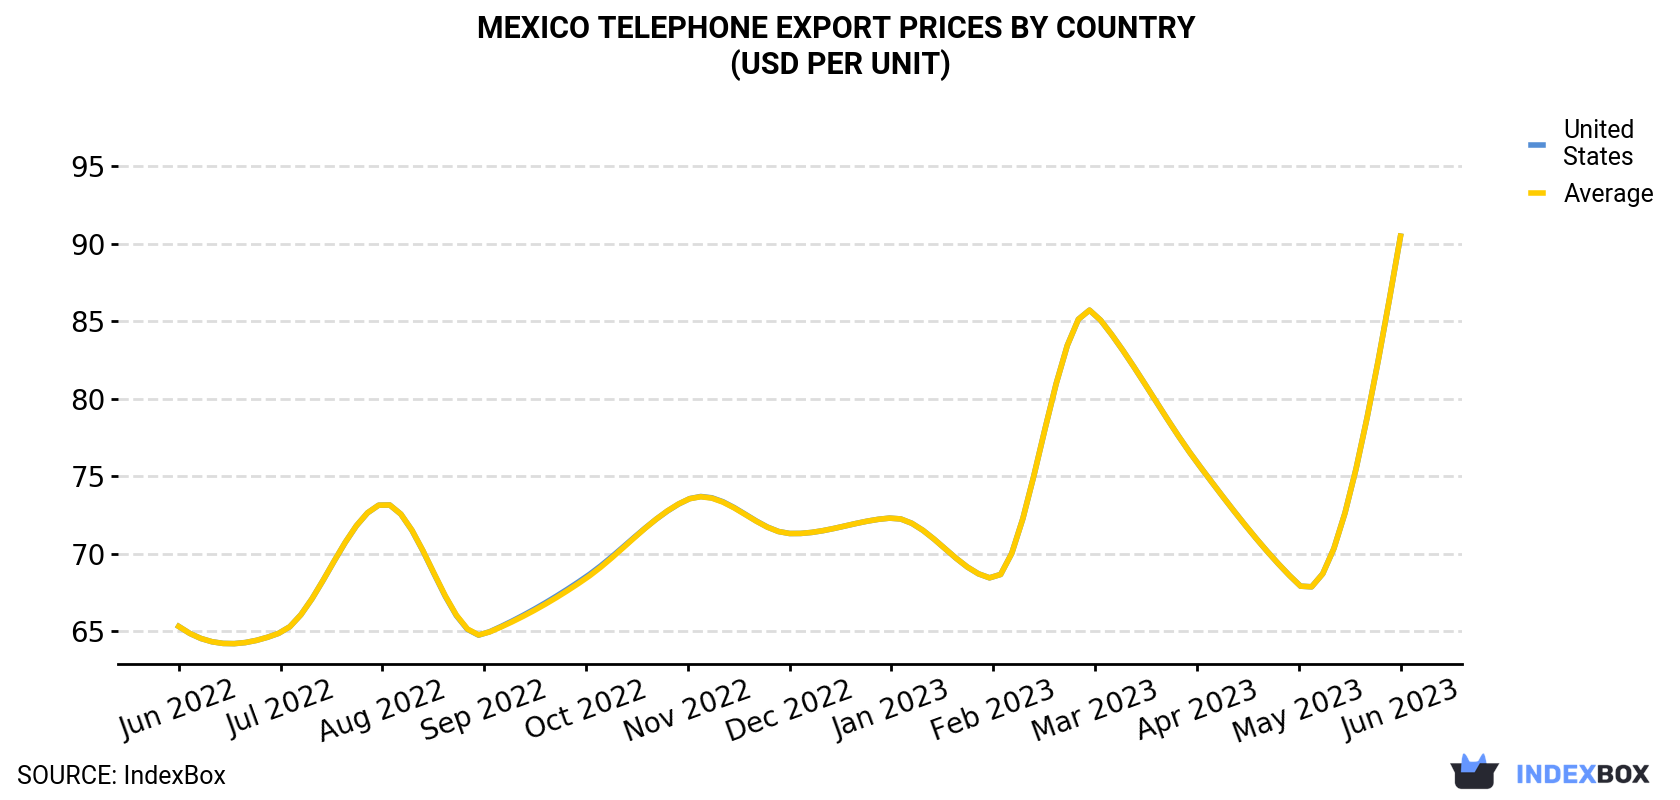 Mexico Telephone Export Prices By Country (USD Per Unit)